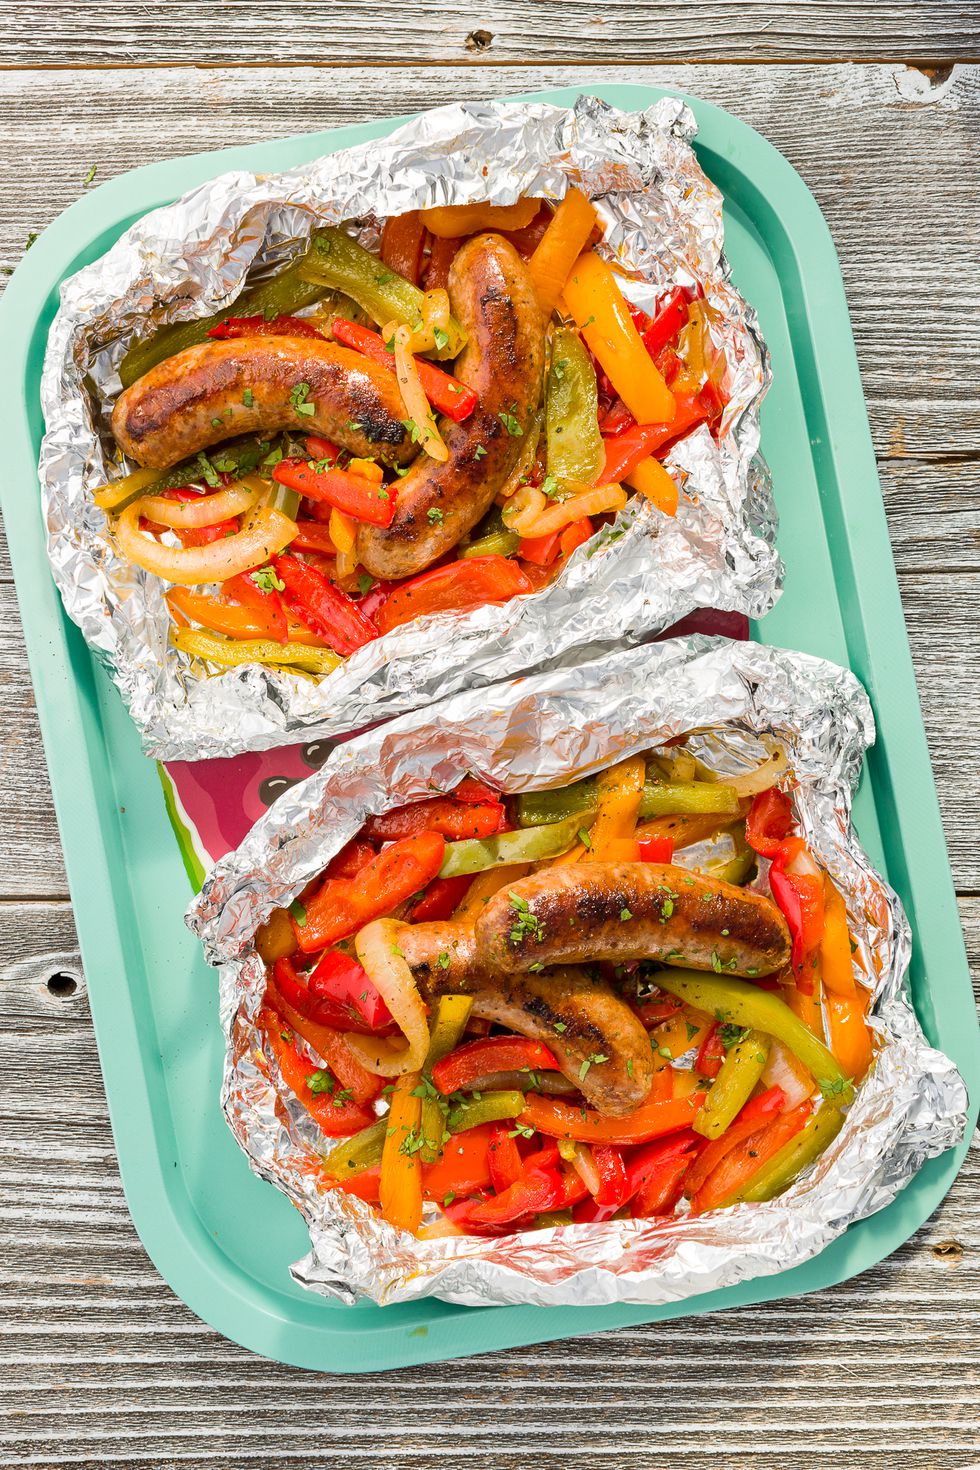 Camping recipes and Camp food ideas